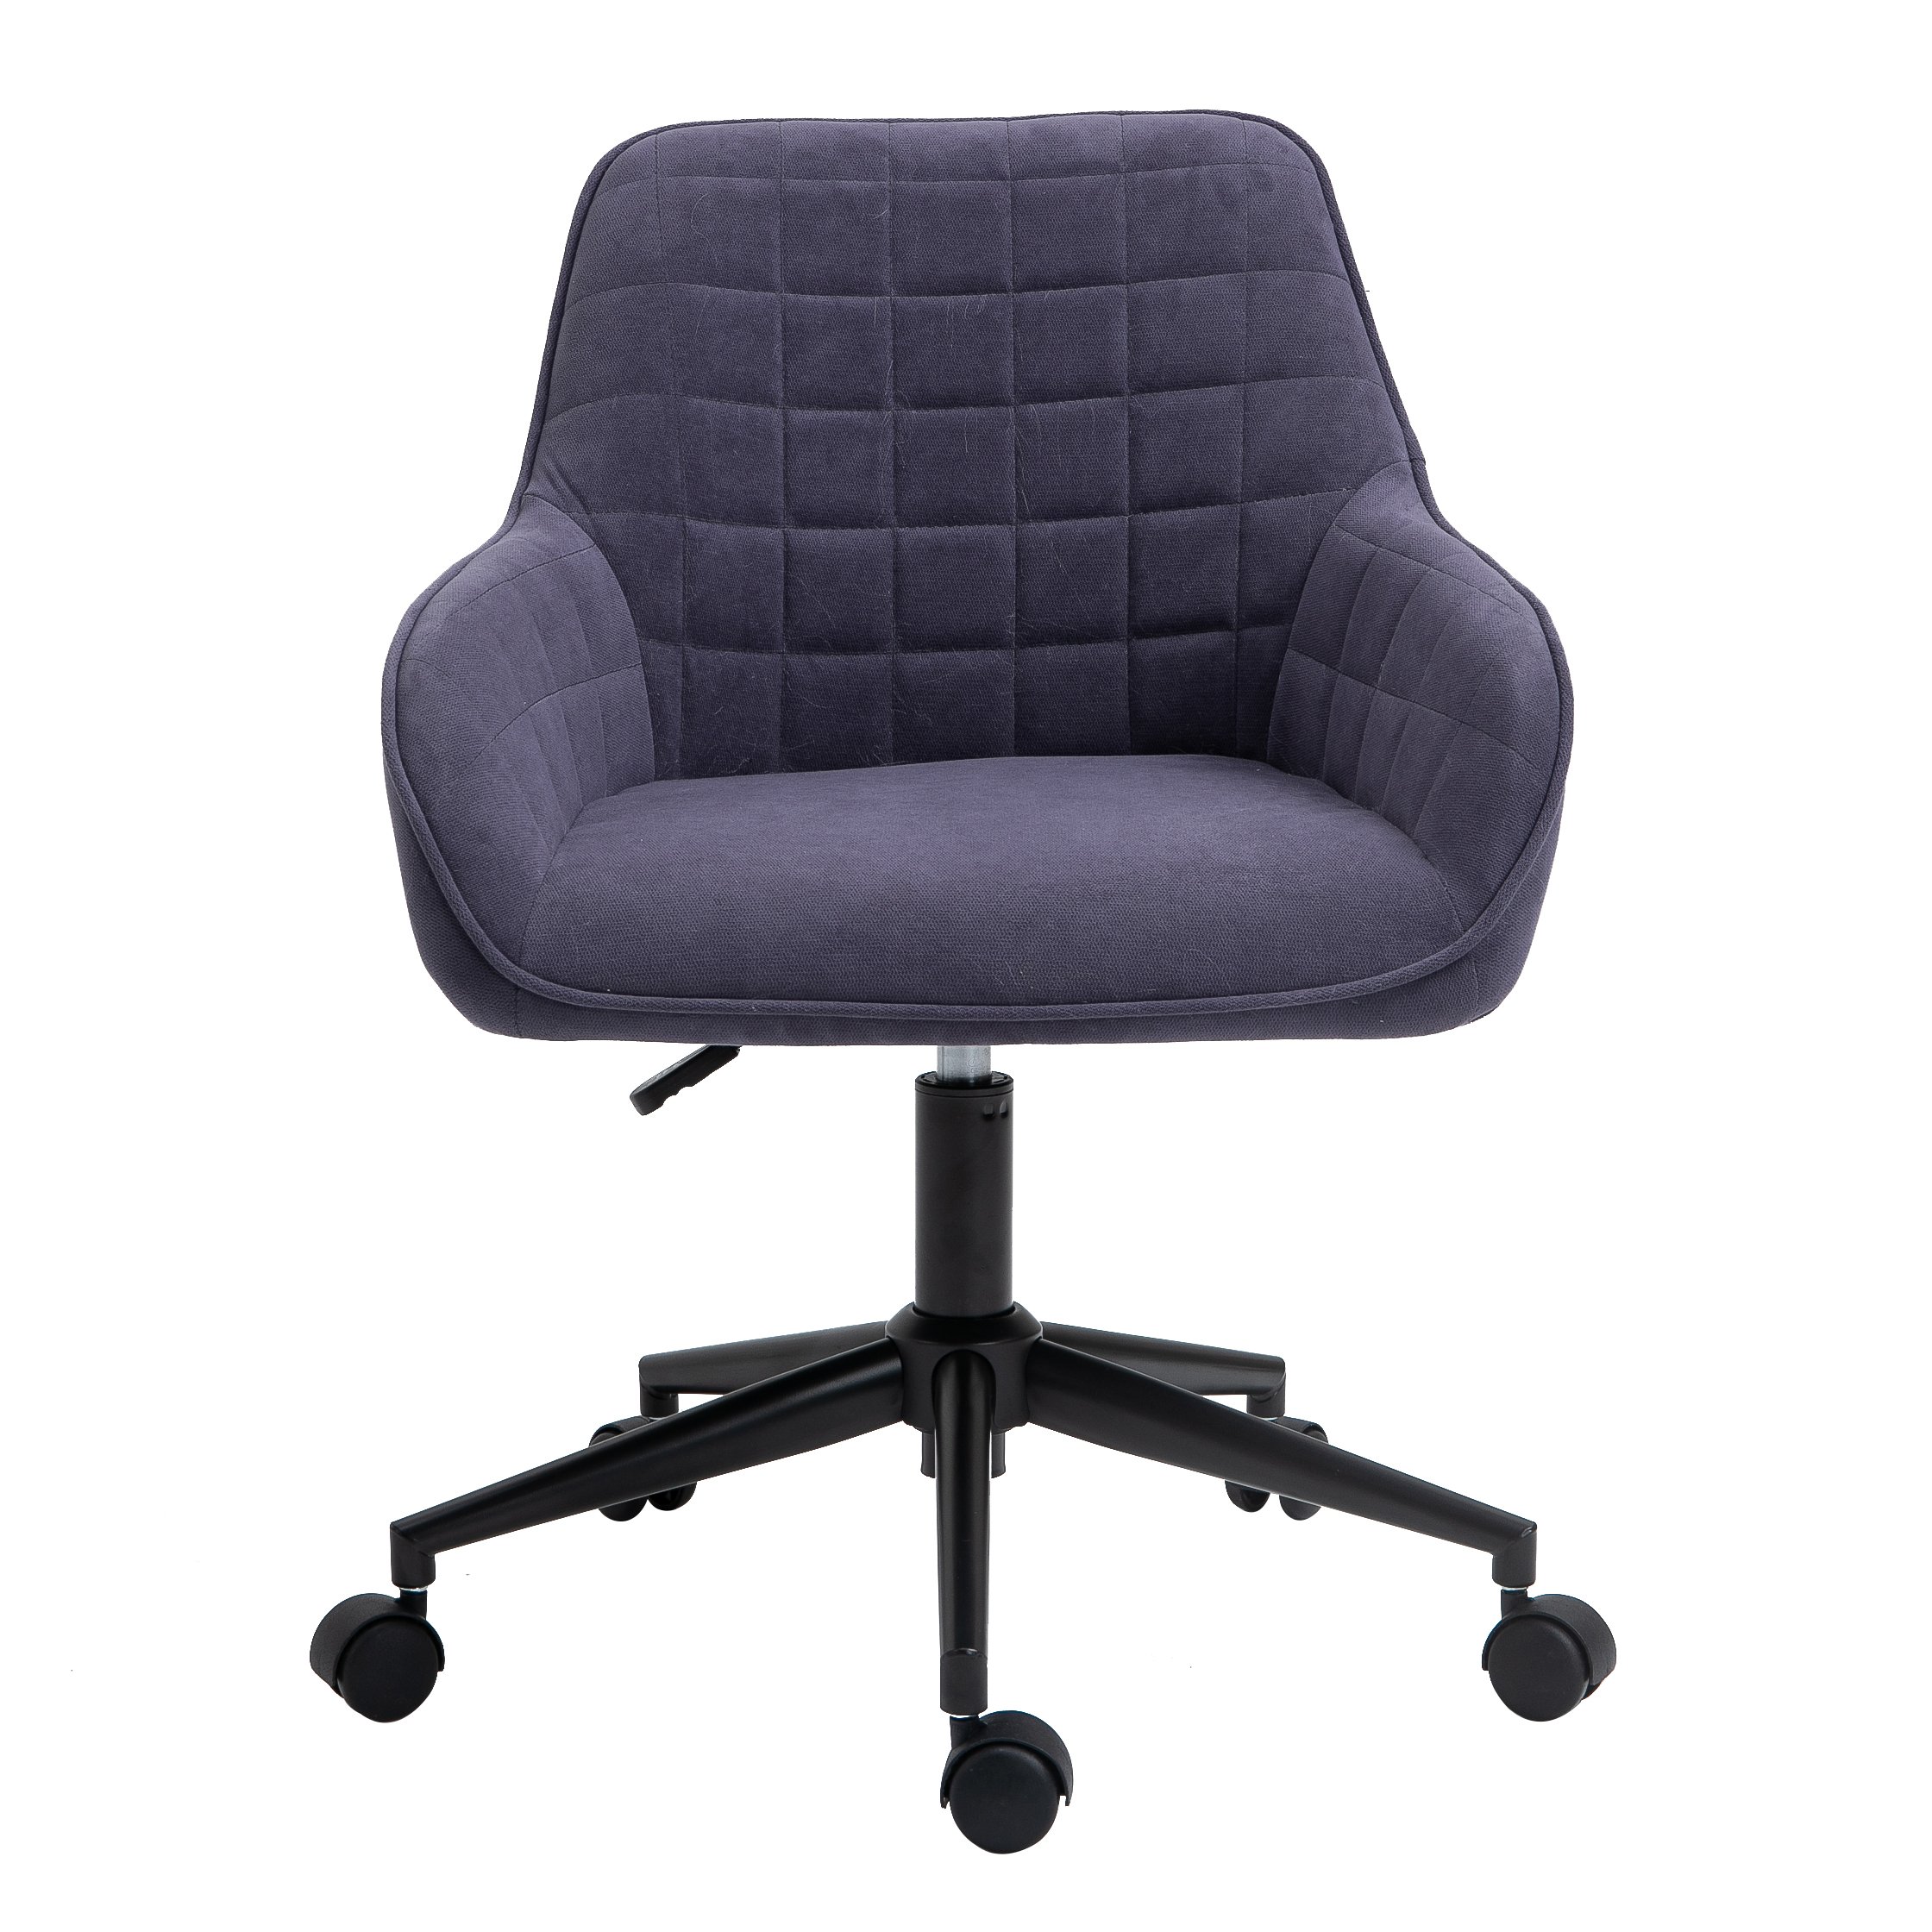 The Classcially Elegant Chair with Border Welting-CASAINC